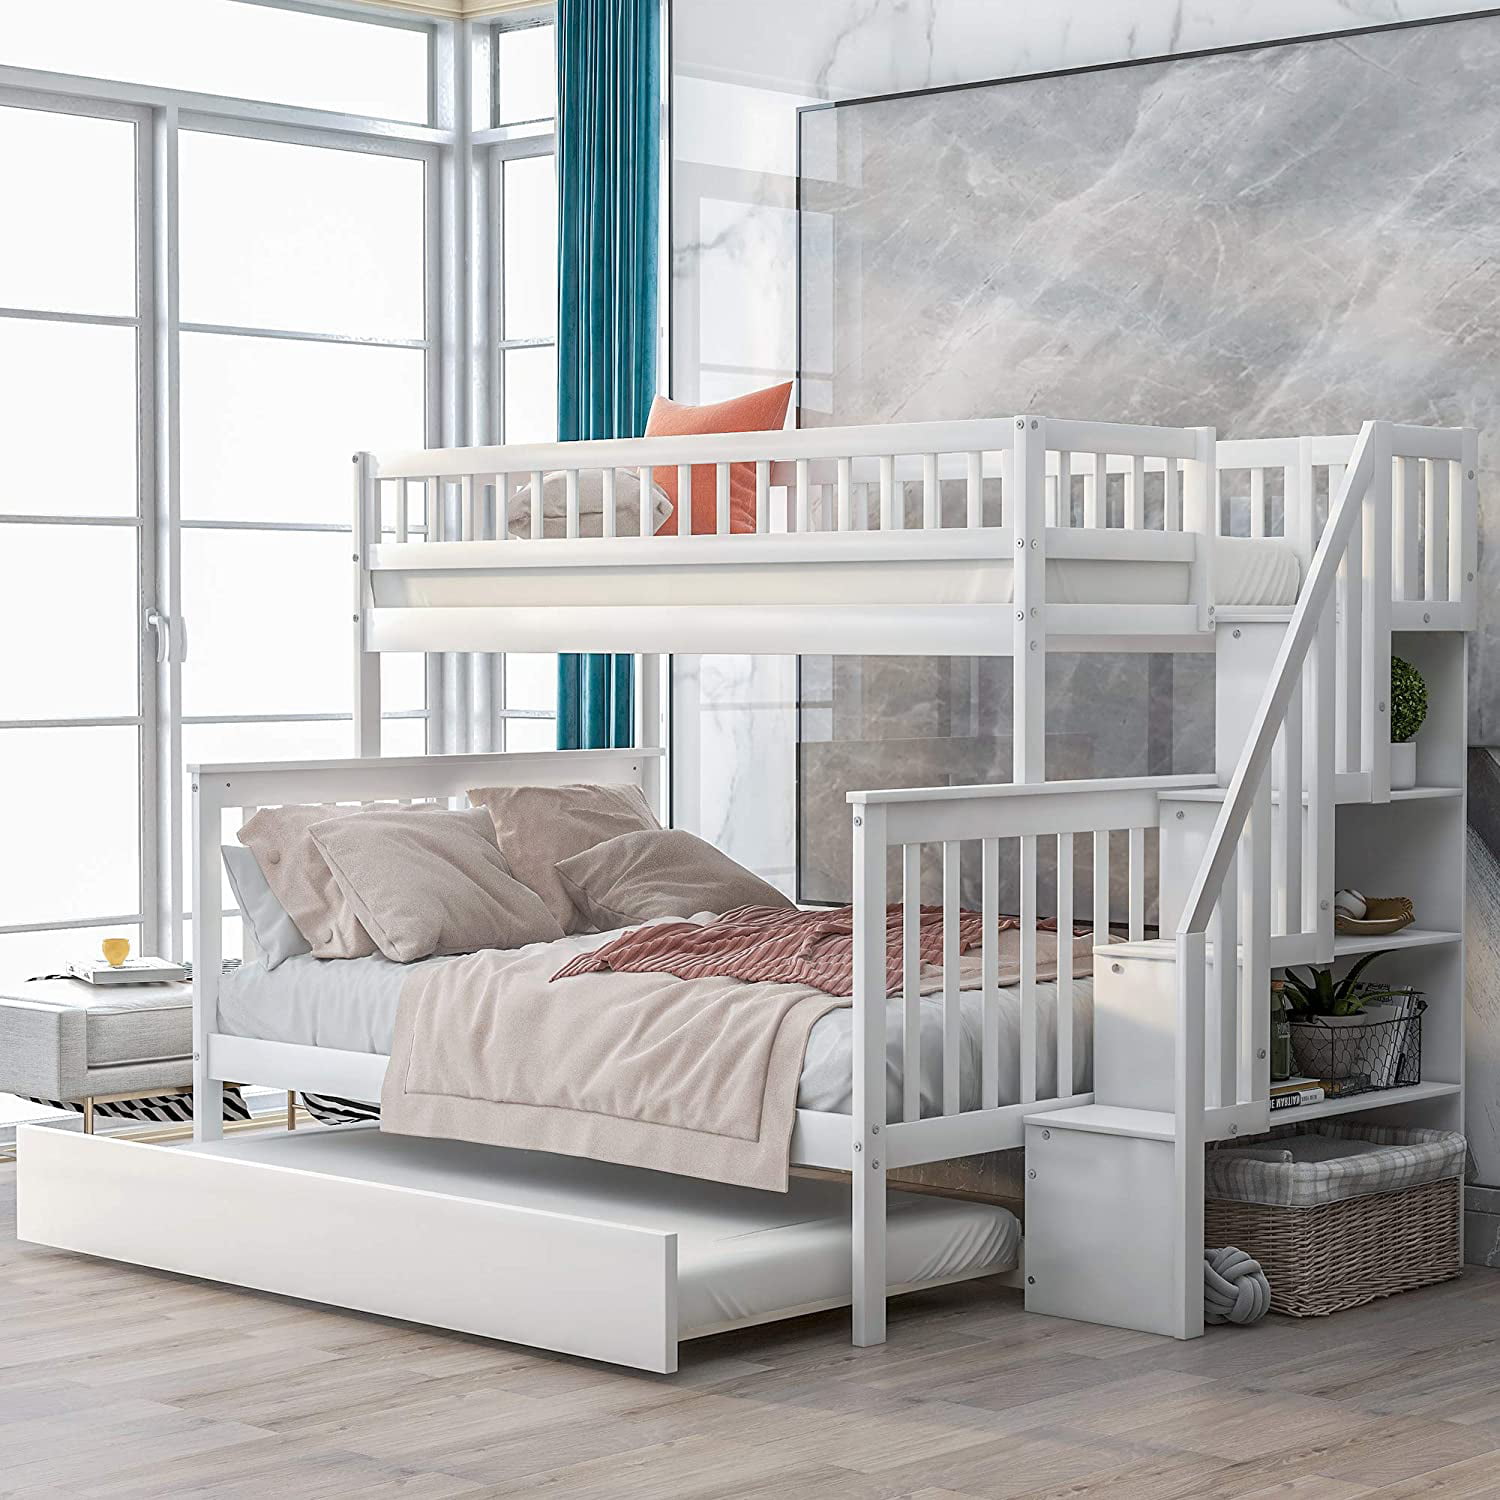 Piscis Bunk Bed Beds Twin Over, Wood Bunk Beds Twin Over Full With Trundle Bed